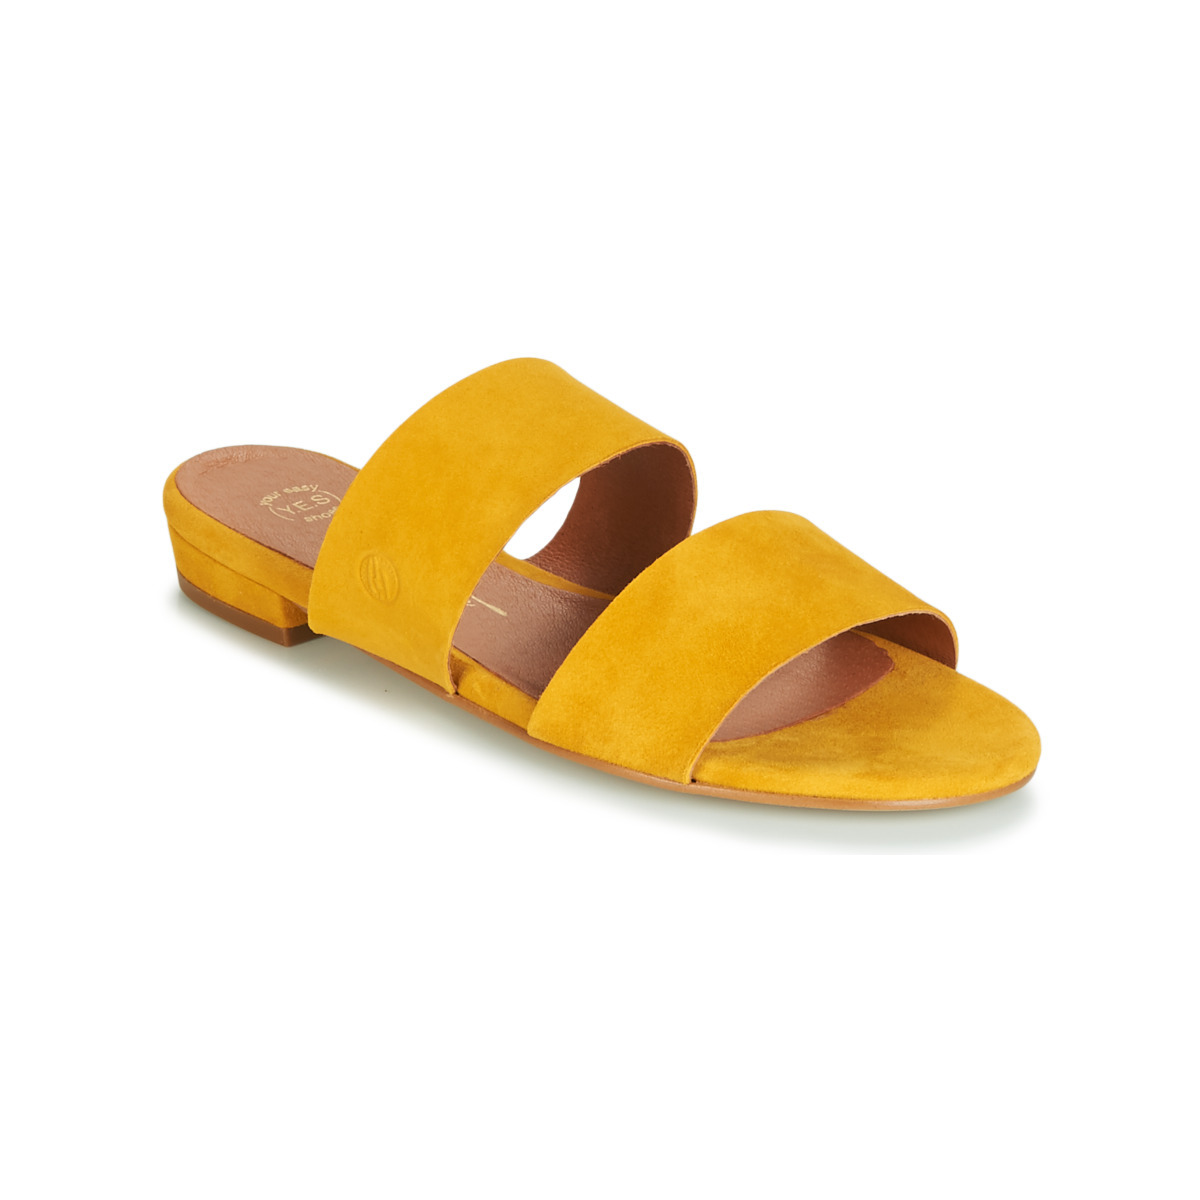 Spartoo Woman Slippers in Yellow by Betty London GOOFASH